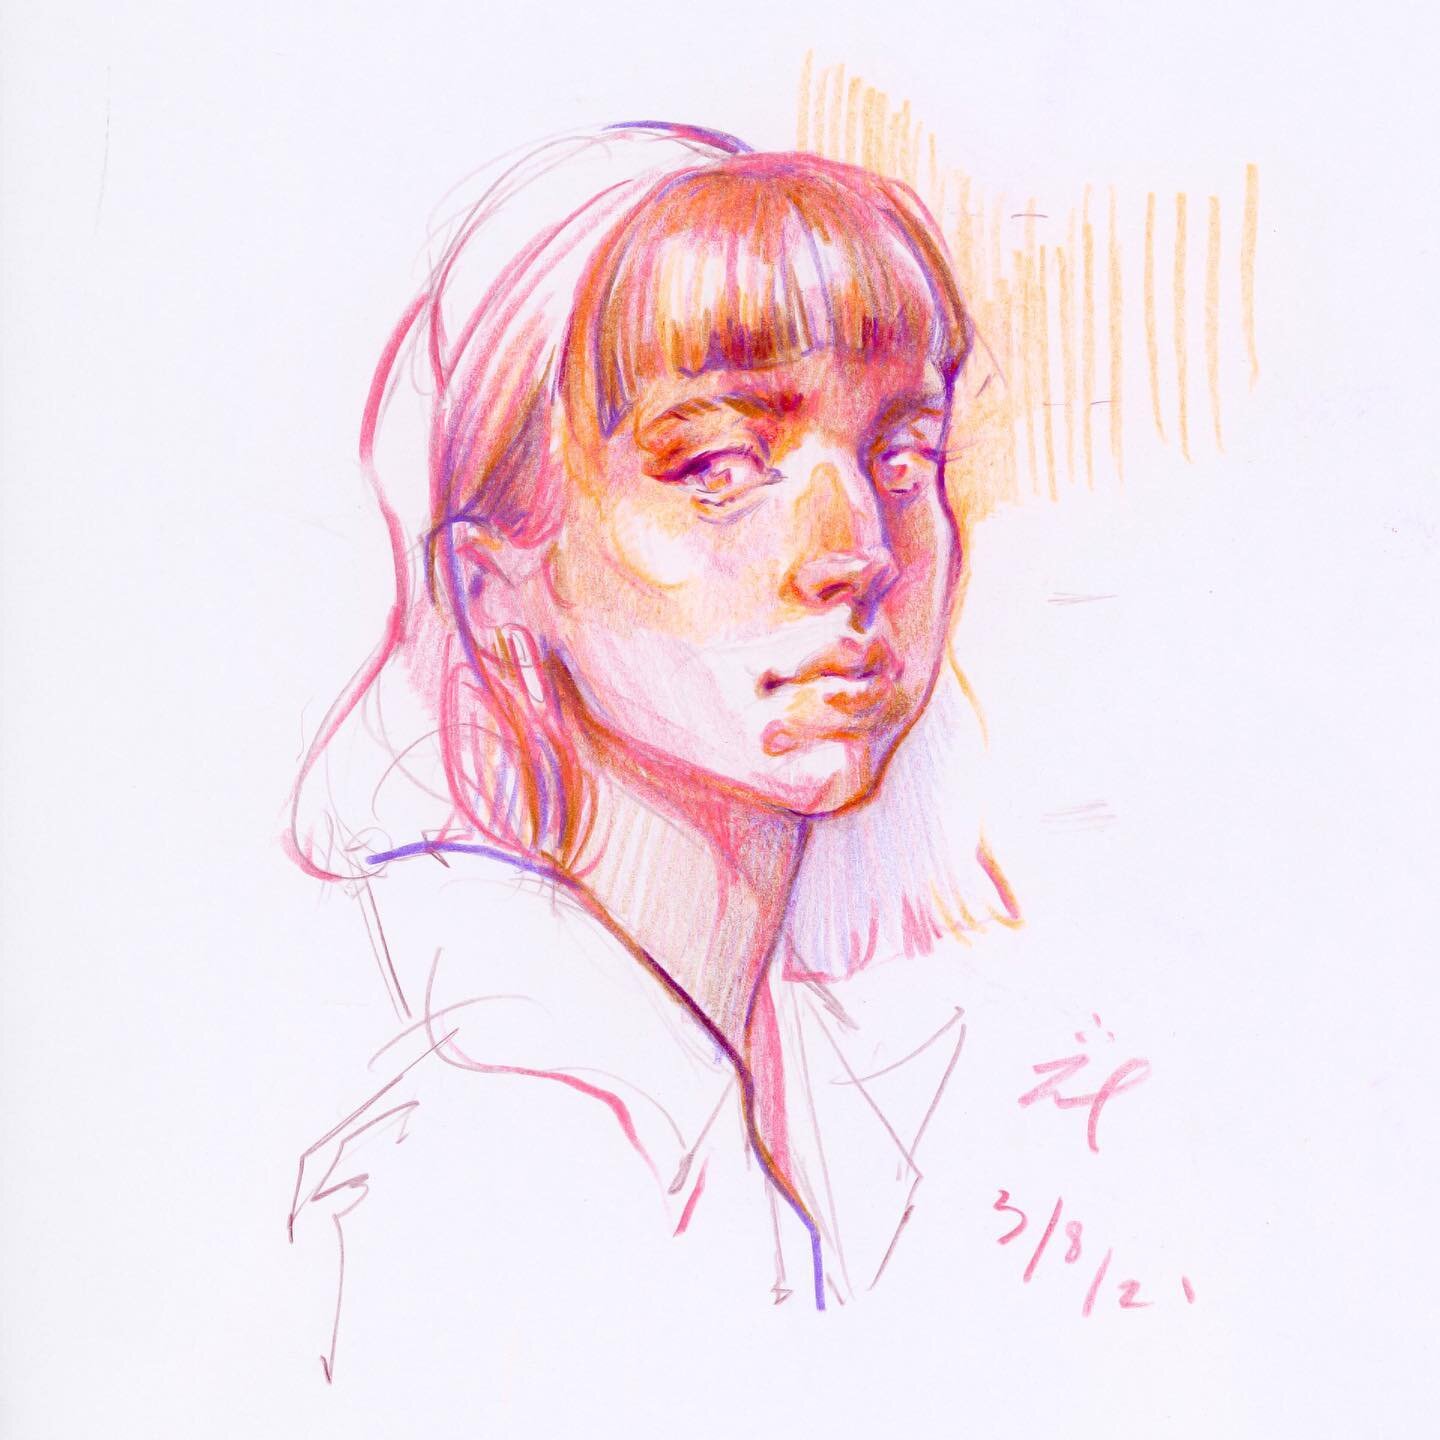 my sketchbook just got a lot more colorful

#coloredpencil #coloredpencildrawing #coloredpencilportrait #portraitdrawing #portraitstudy #colorstudy #sketchbookdrawing #pencildrawing #colourart #colouredpencils